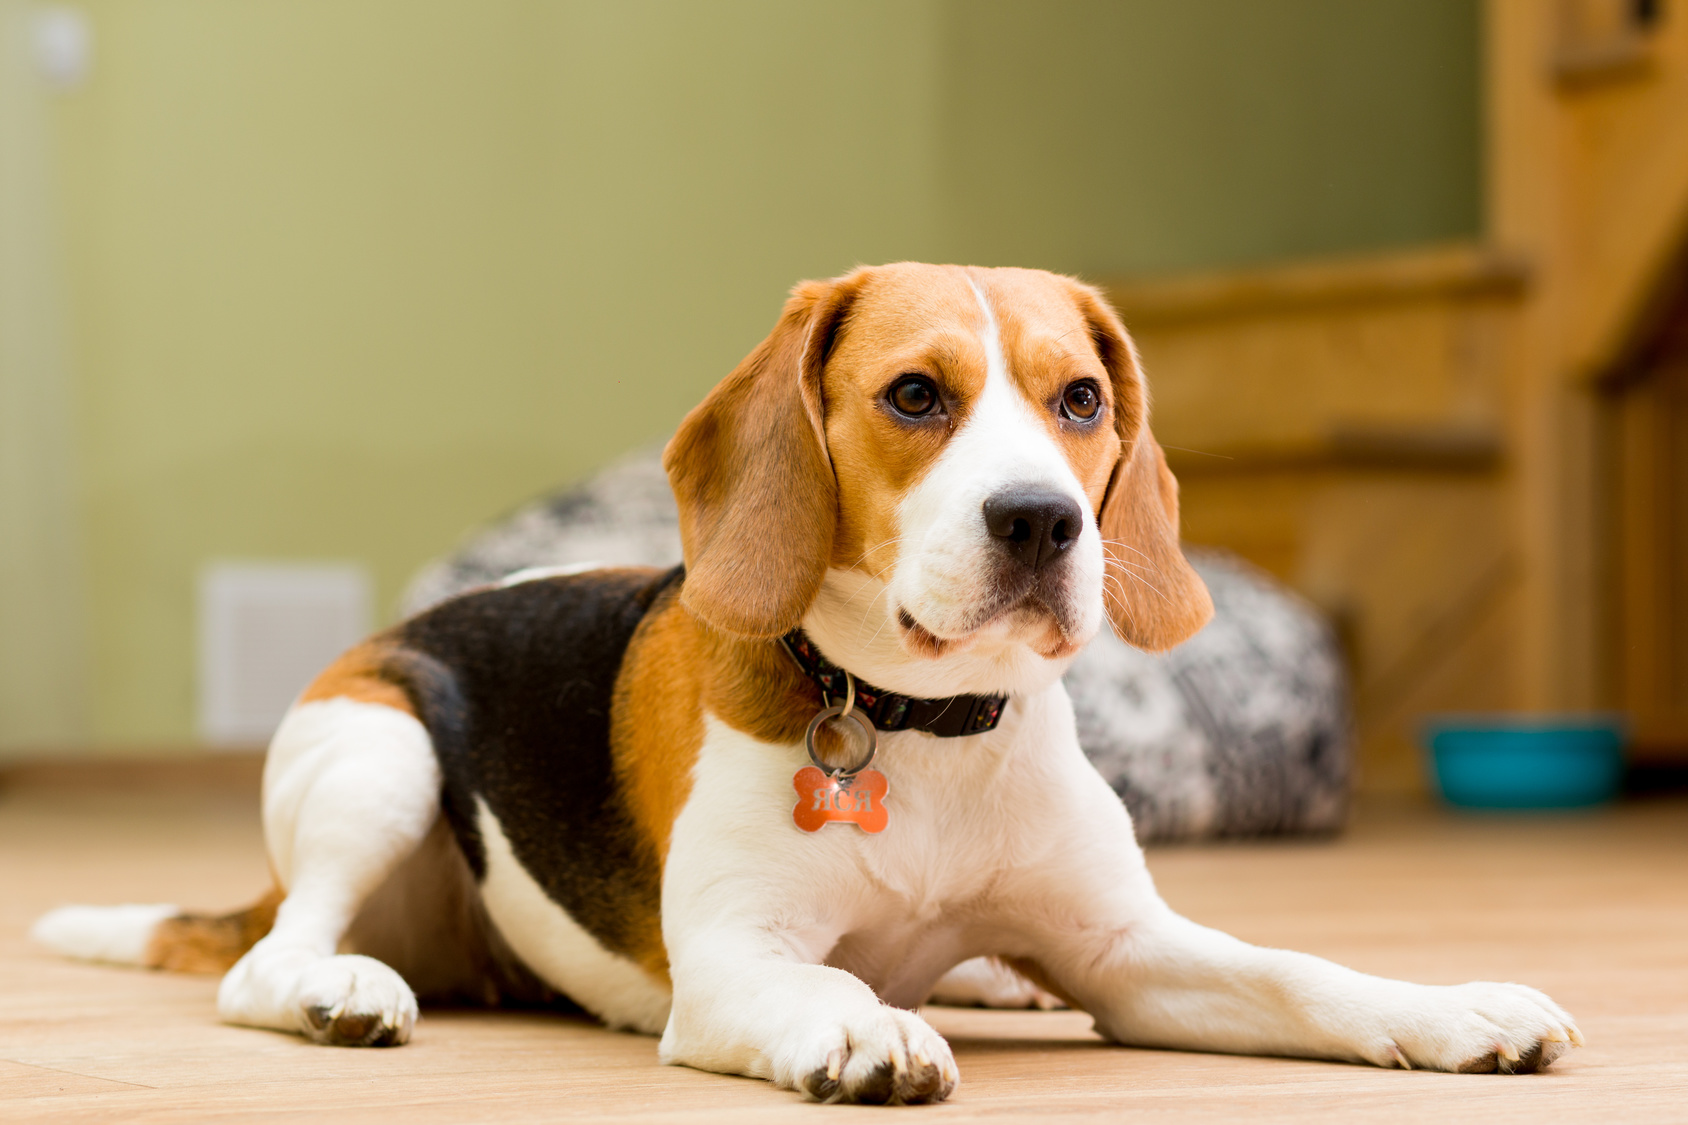 Beagle Puppy Stock Photo - Download Image Now - iStock